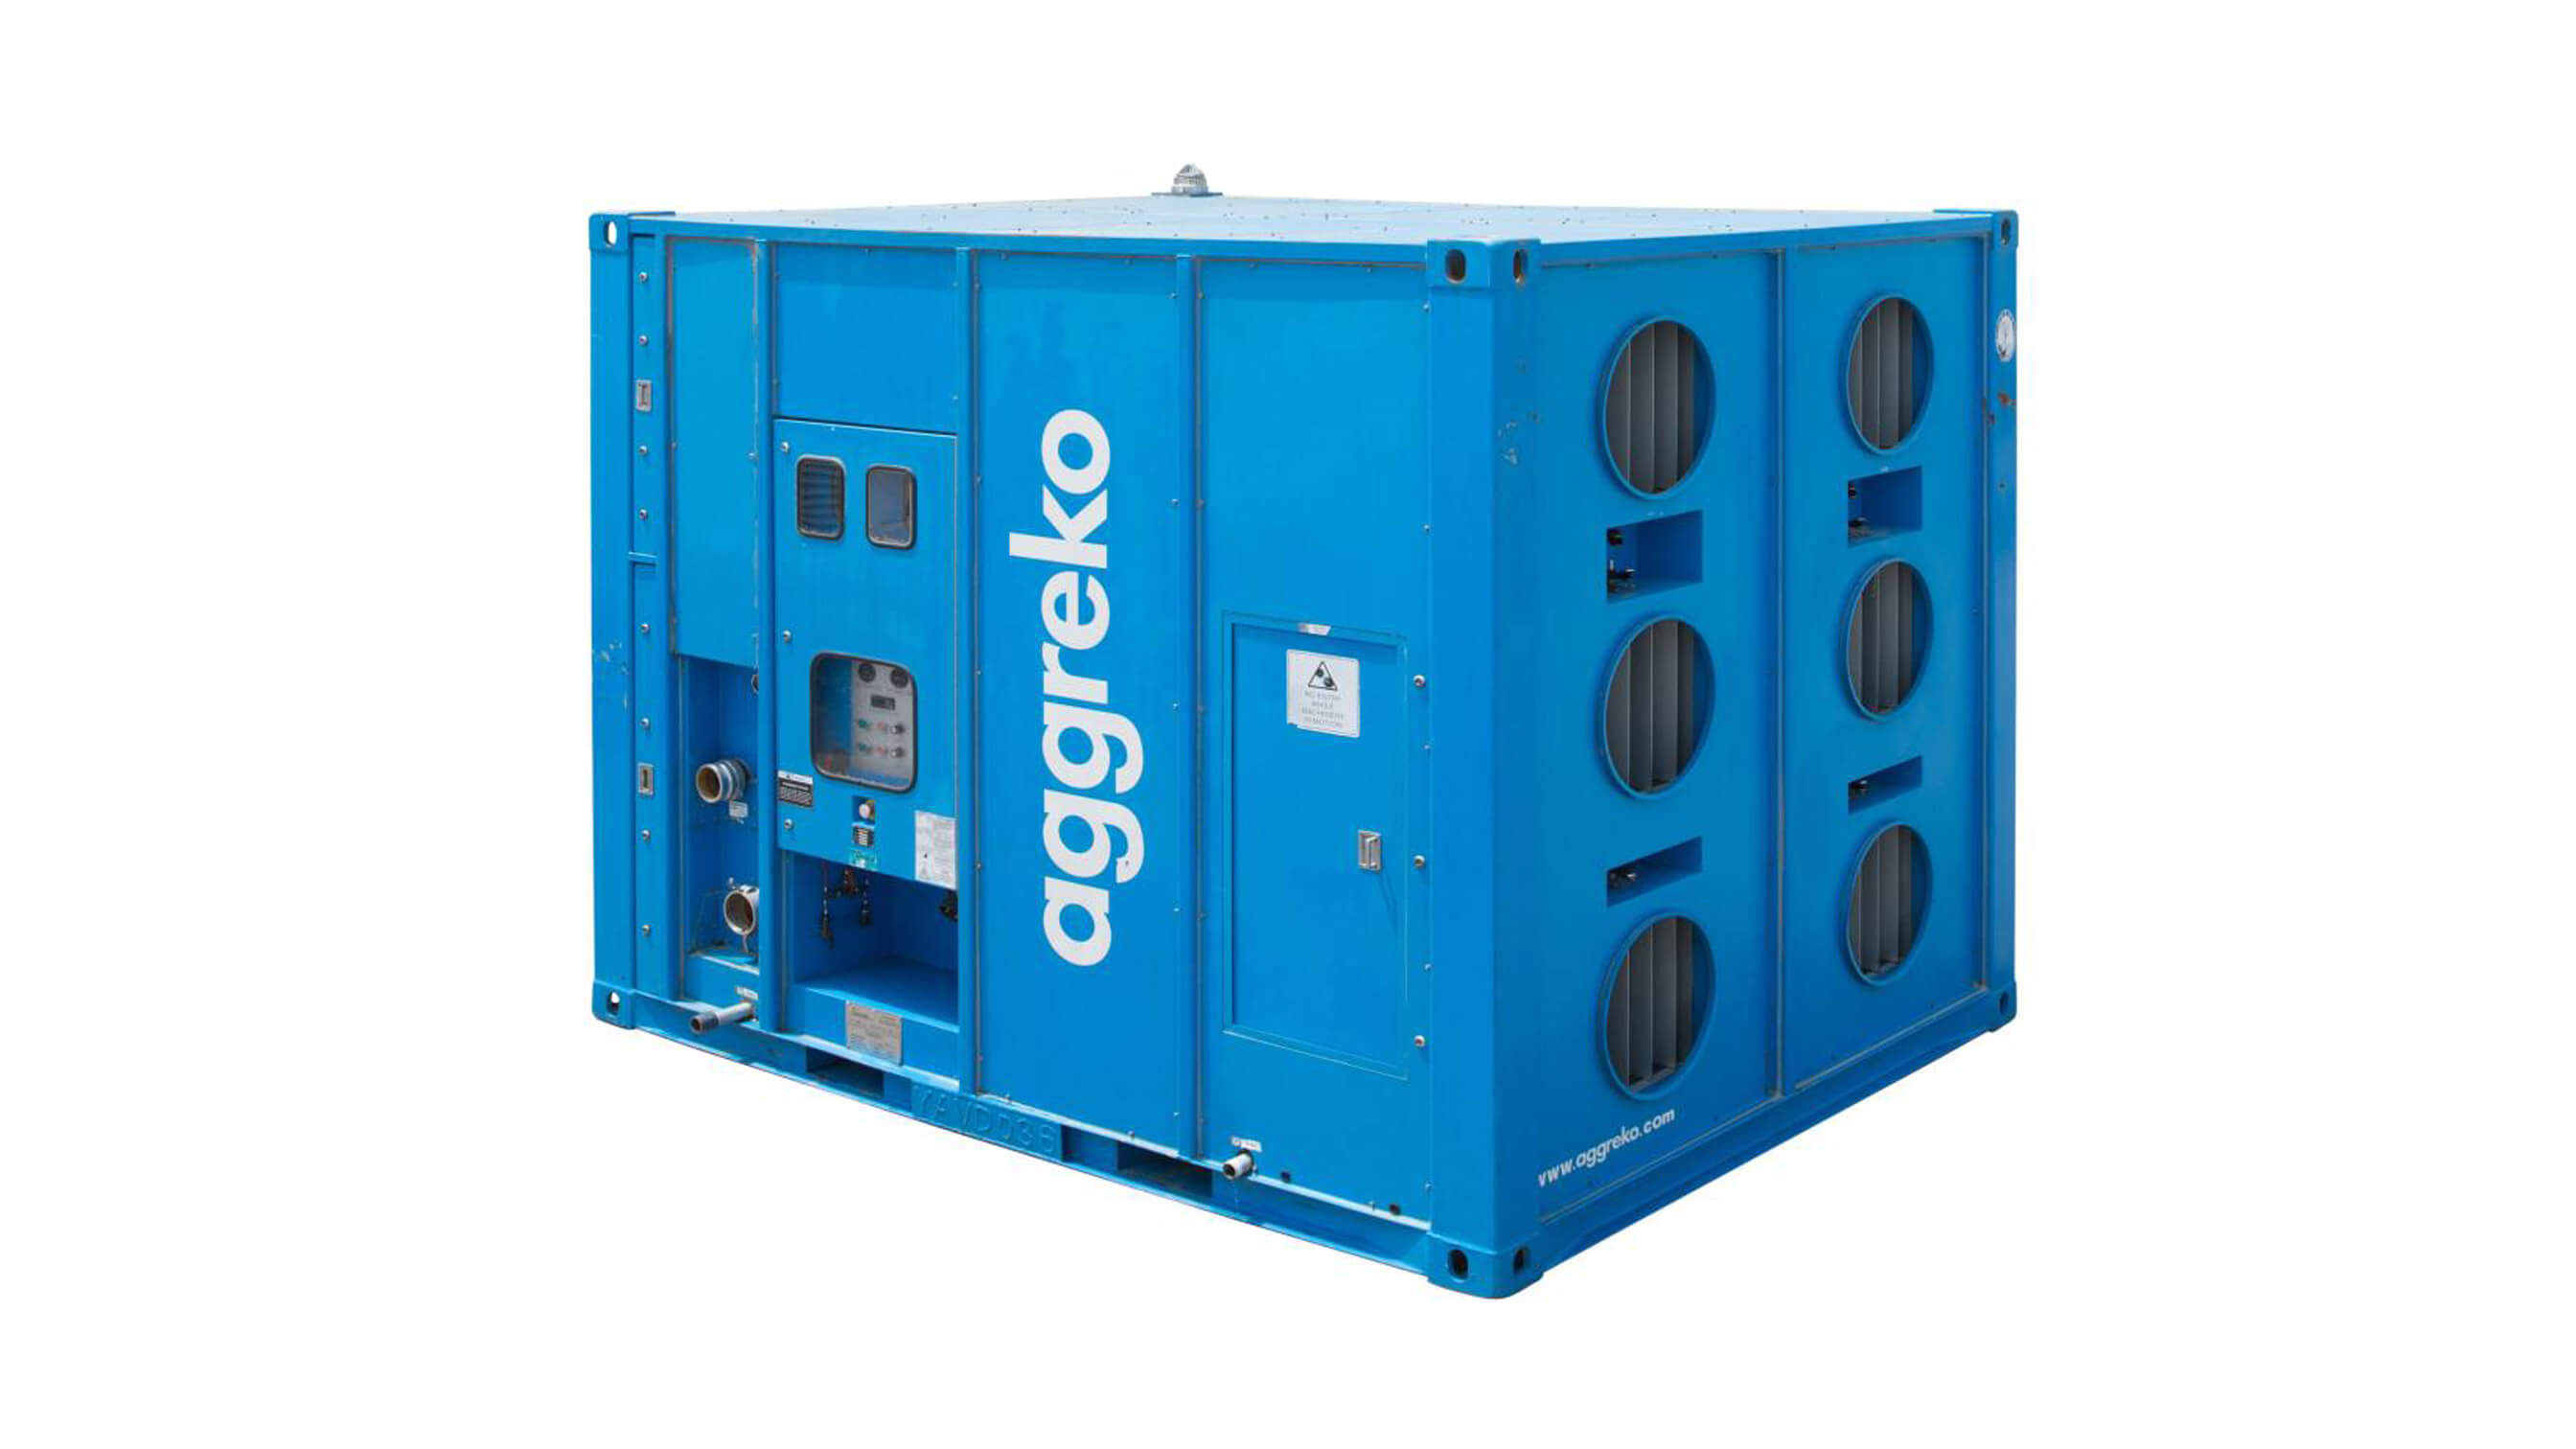 Aggreko 500 kW air handling unit pictured at an angle 